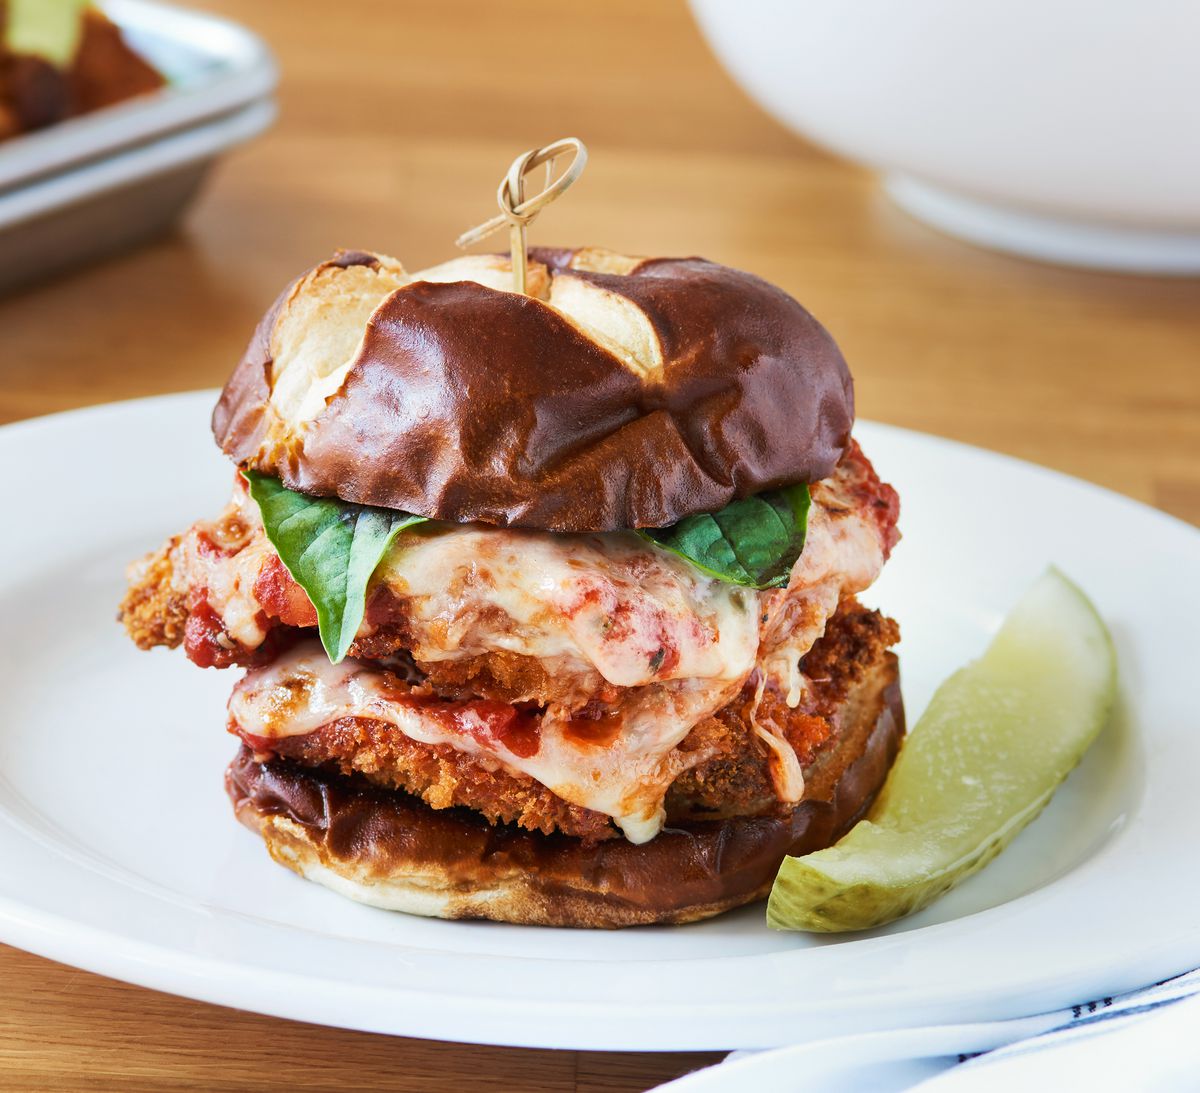 A toasted hamburger bun with two pieces of battered and fried crispy chicken slathered with melted mozzarella cheese and red sauce. The sandwich is topped with bright green basil and served with a pickle spear